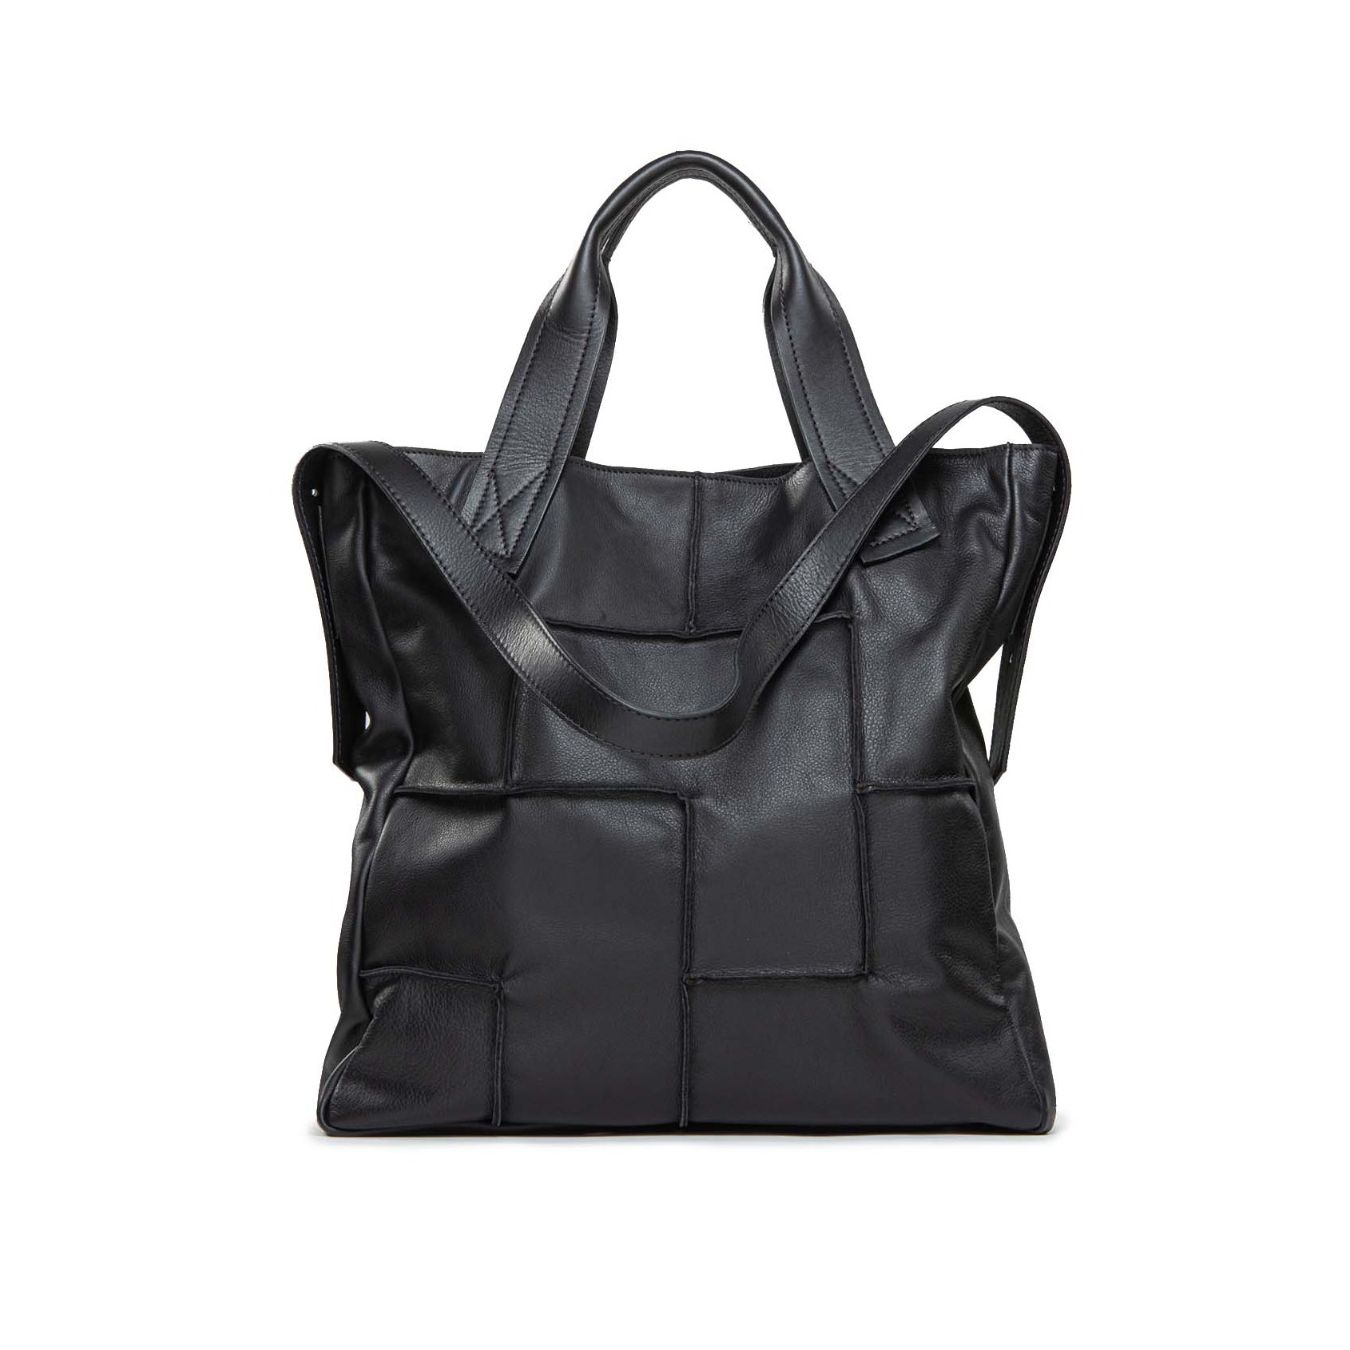  Shopping bag Cuciture Pizzico Softy Nero